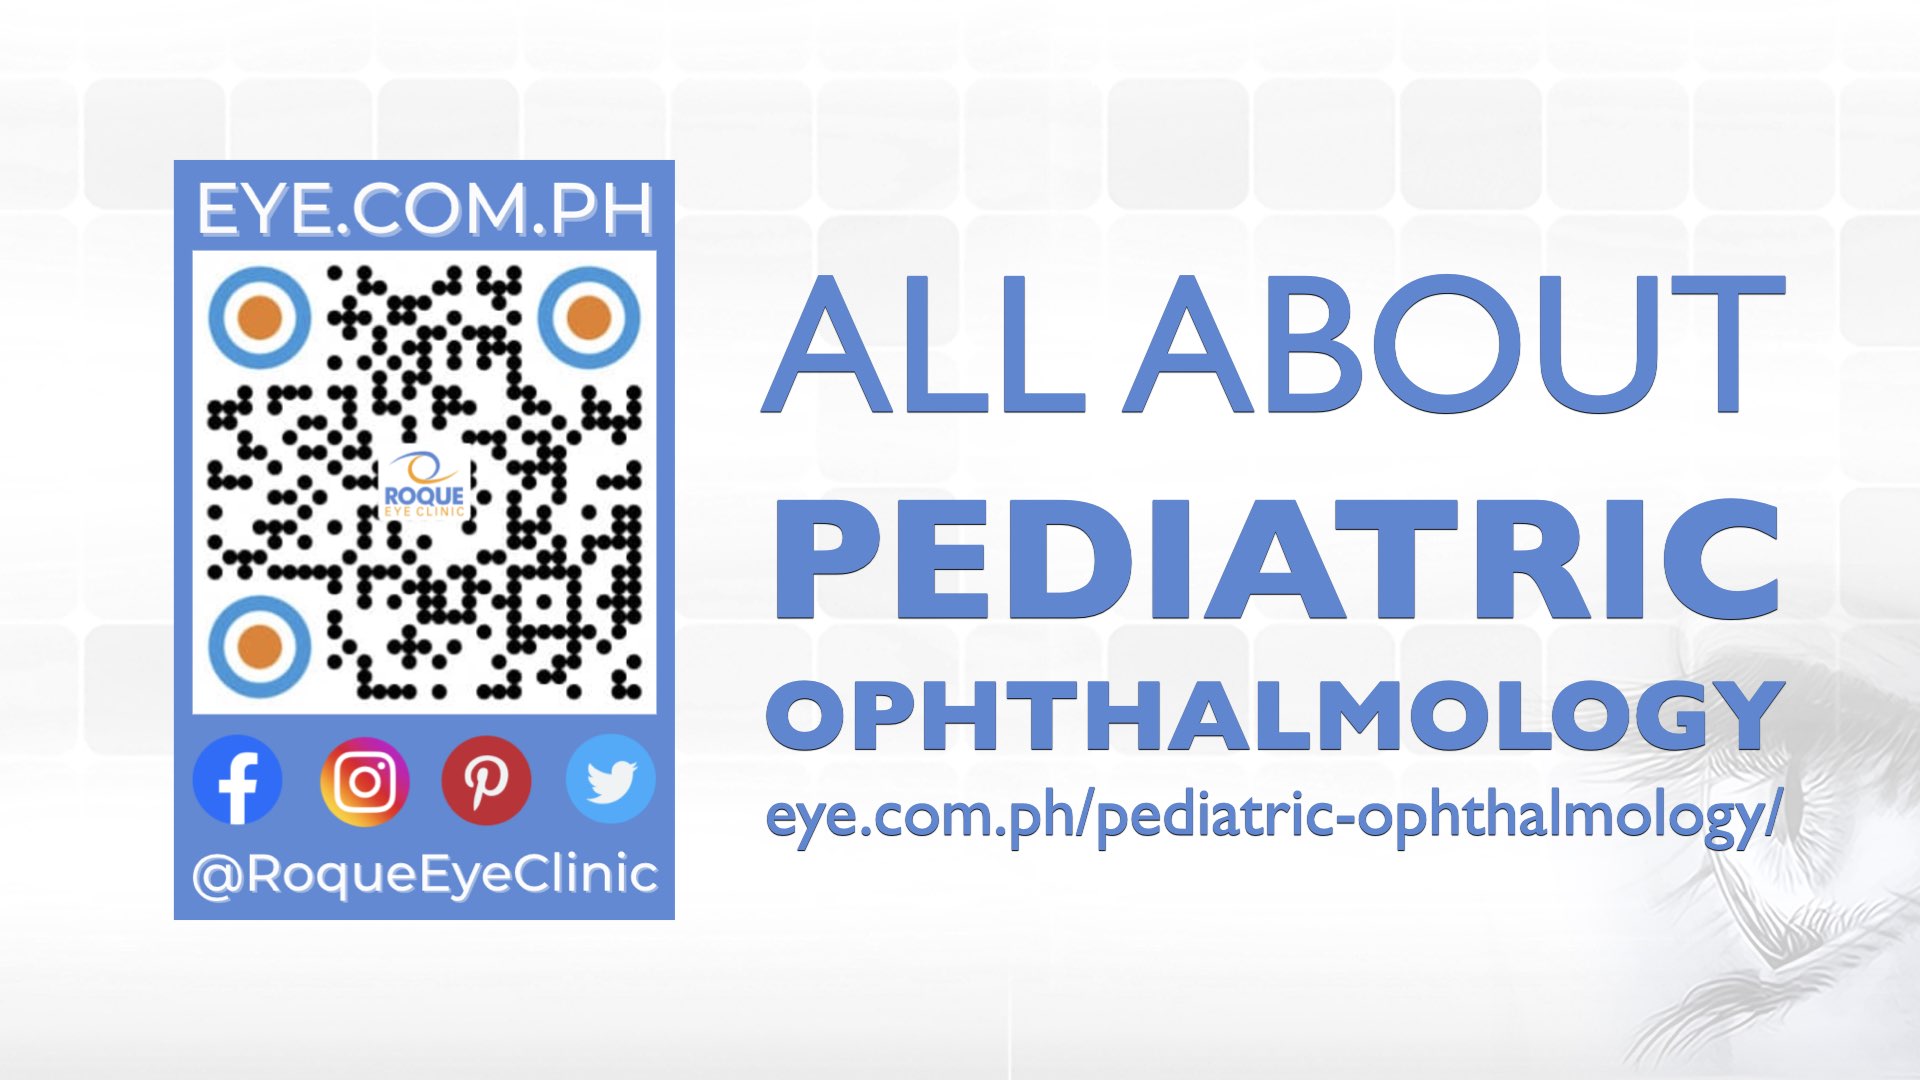 Learn more about pediatric ophthalmology. Visit our Pediatric Ophthalmology Blog.